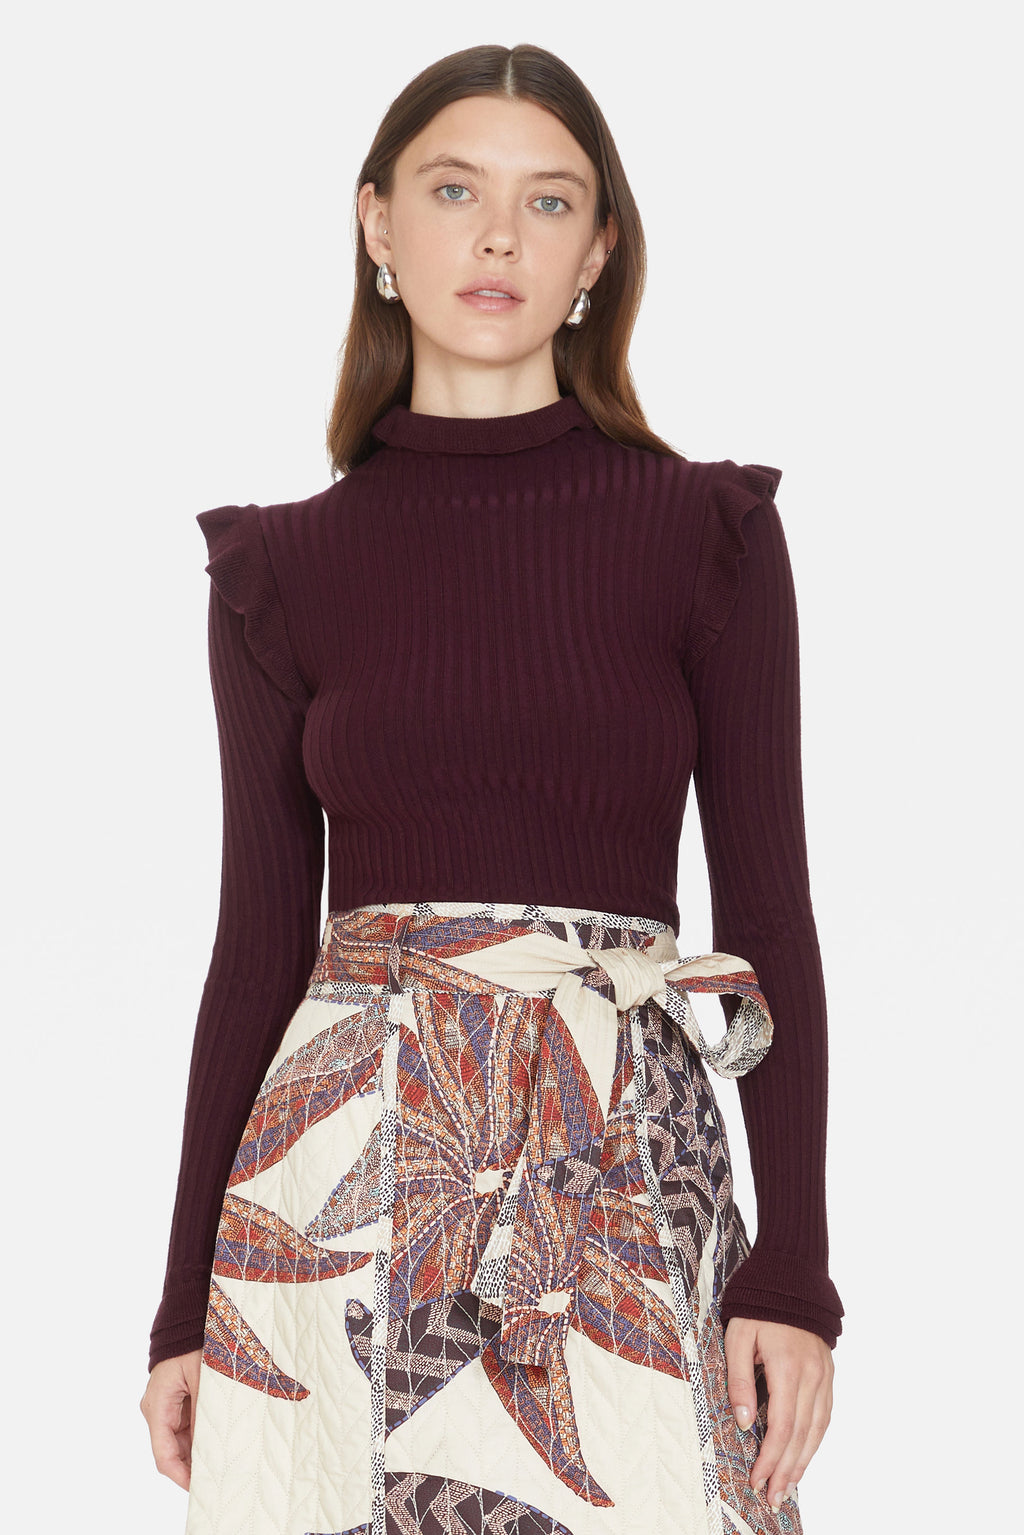 Deep purple turtleneck with ruffle details on shoulders and neck